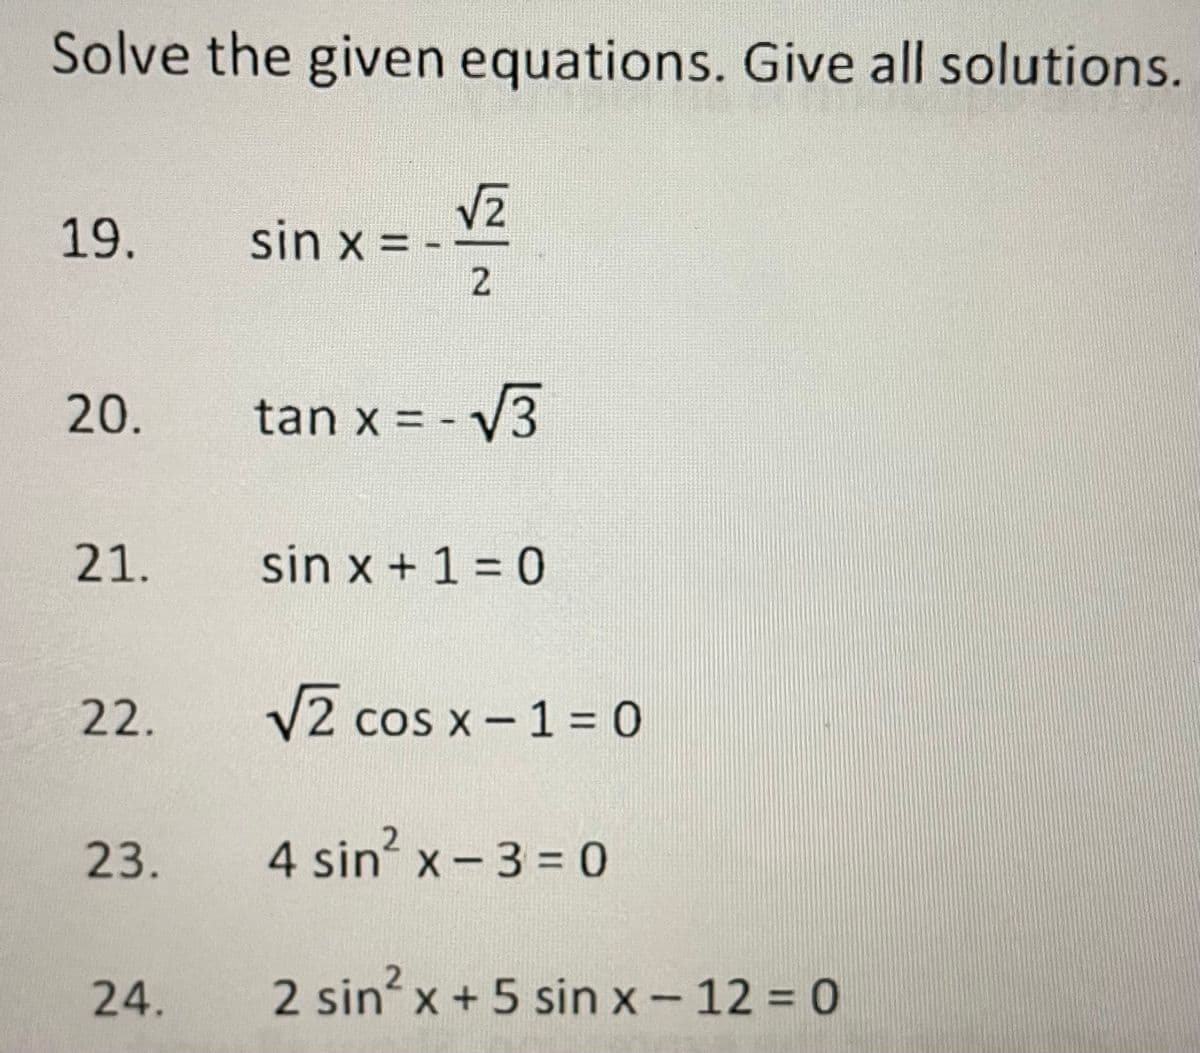 Solve the given equations. Give all solutions.
19.
sin x = -
20.
tan x = - V3
21.
sin x + 1 = 0
22.
V2 cos x- 1 = 0
23.
4 sin' x - 3 = 0
2.
24.
2 sin x +5 sin x-12 = 0
2.
